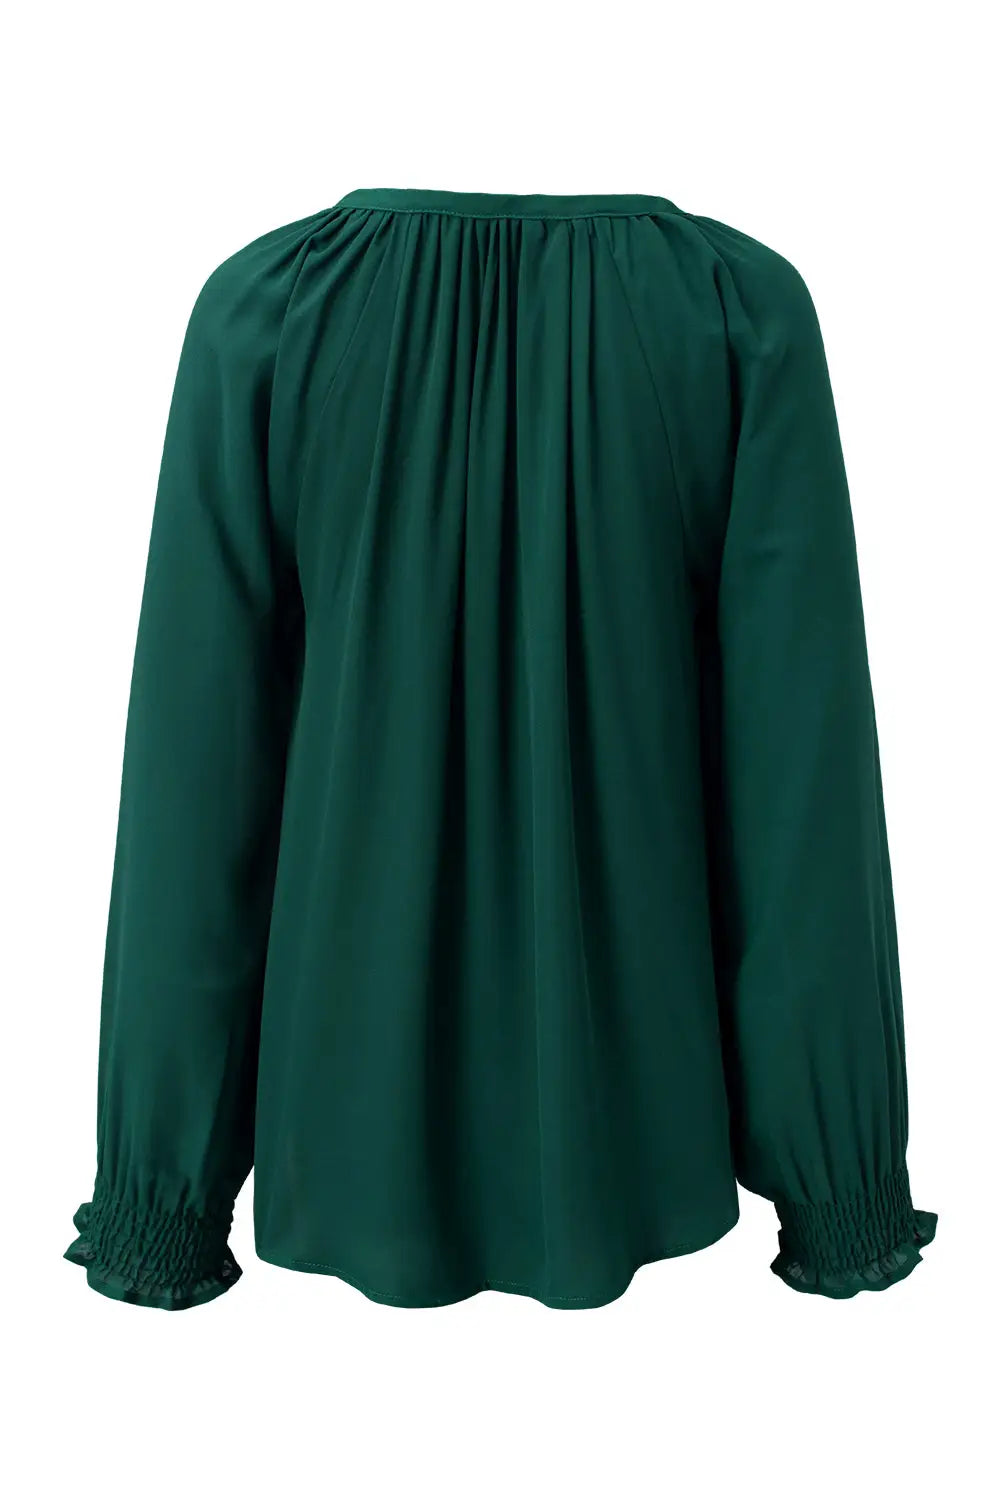 Rose pleated v neck puffy sleeve blouse - tops